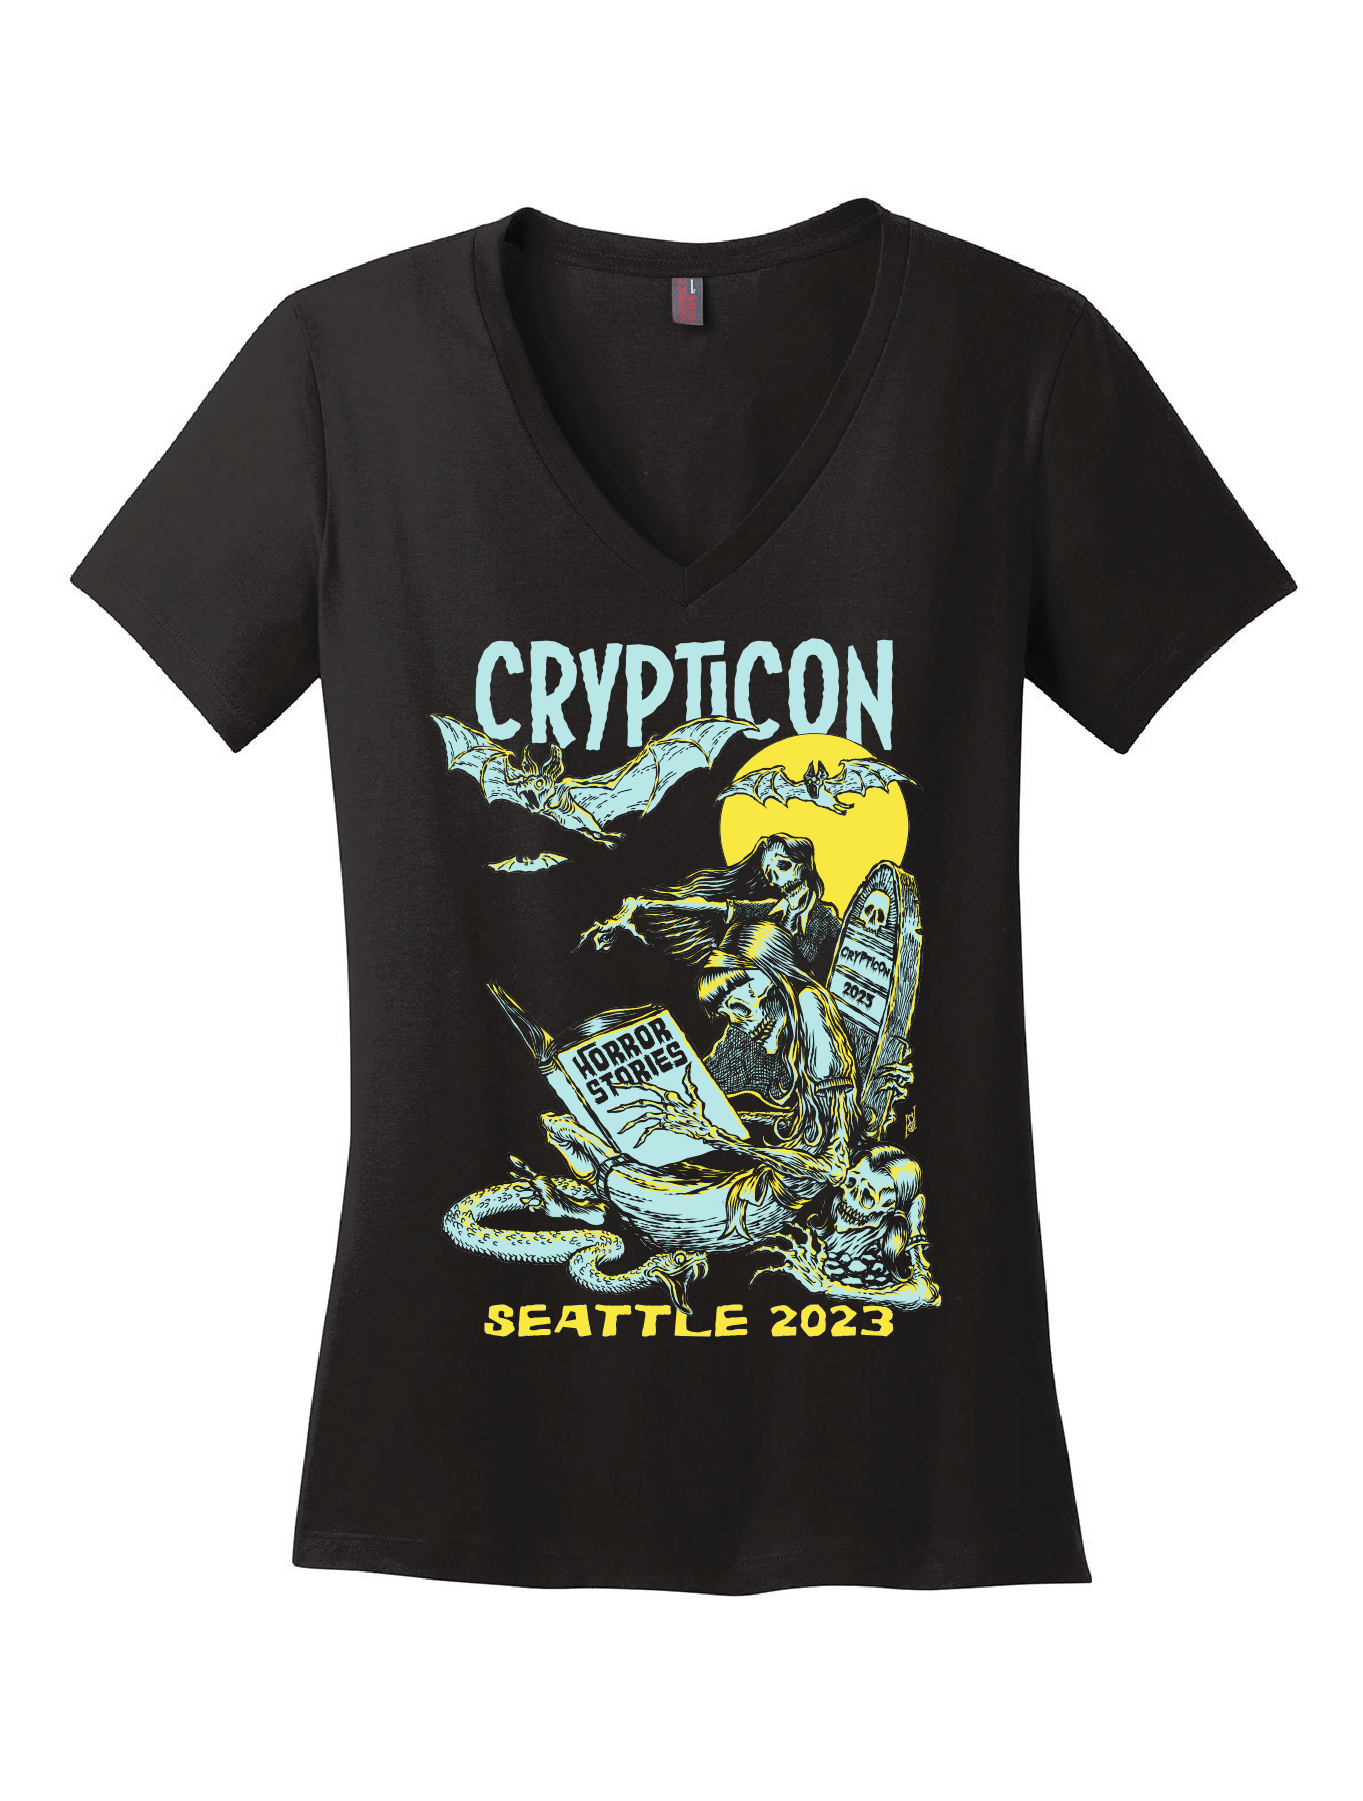 Crypticon 2023 · Grave Girls · Last Chance